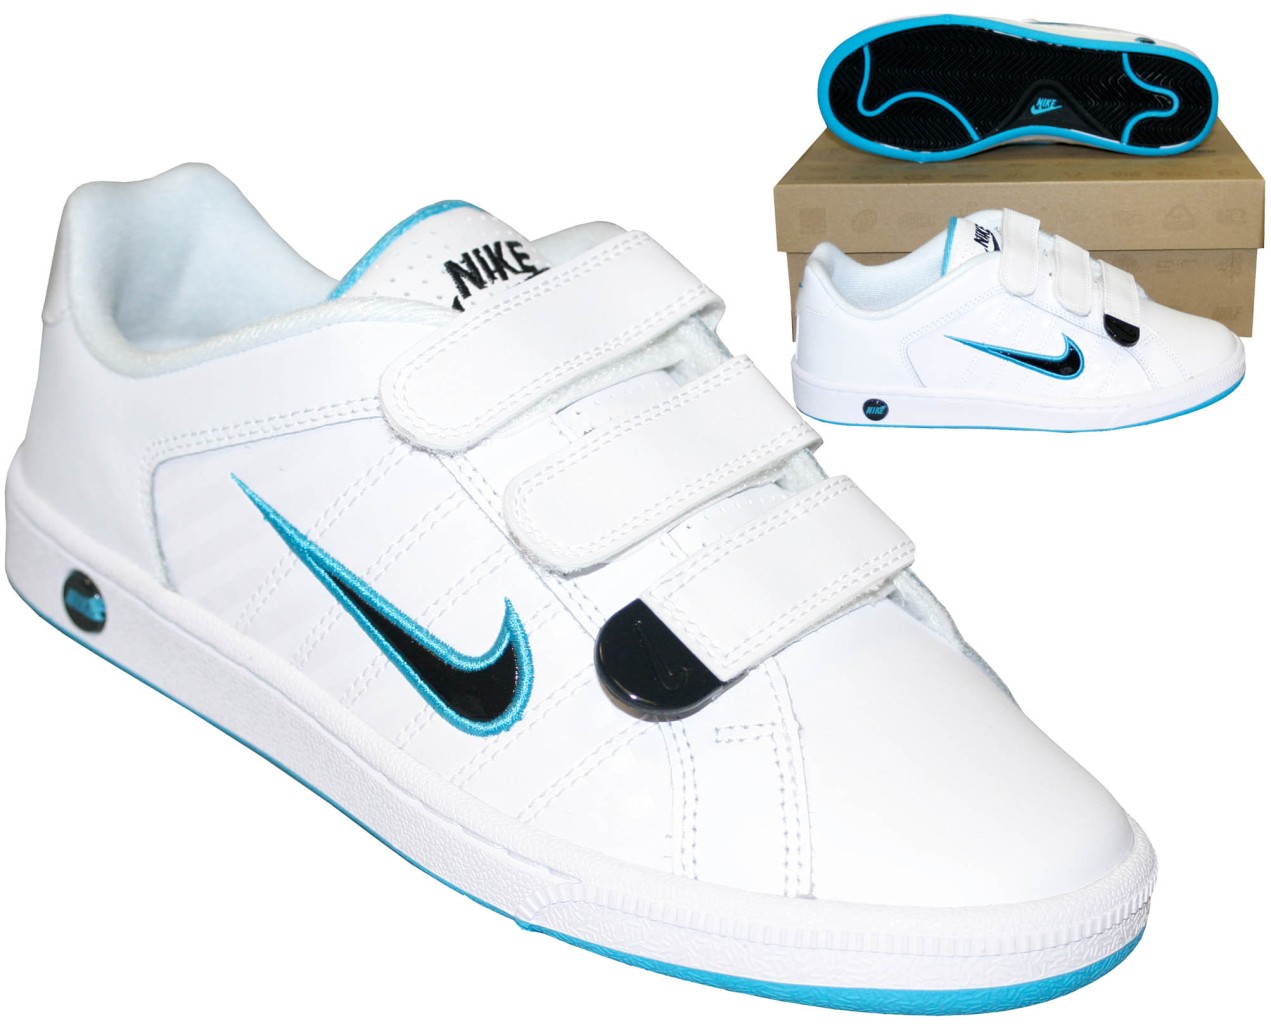 nike 3 strap trainers